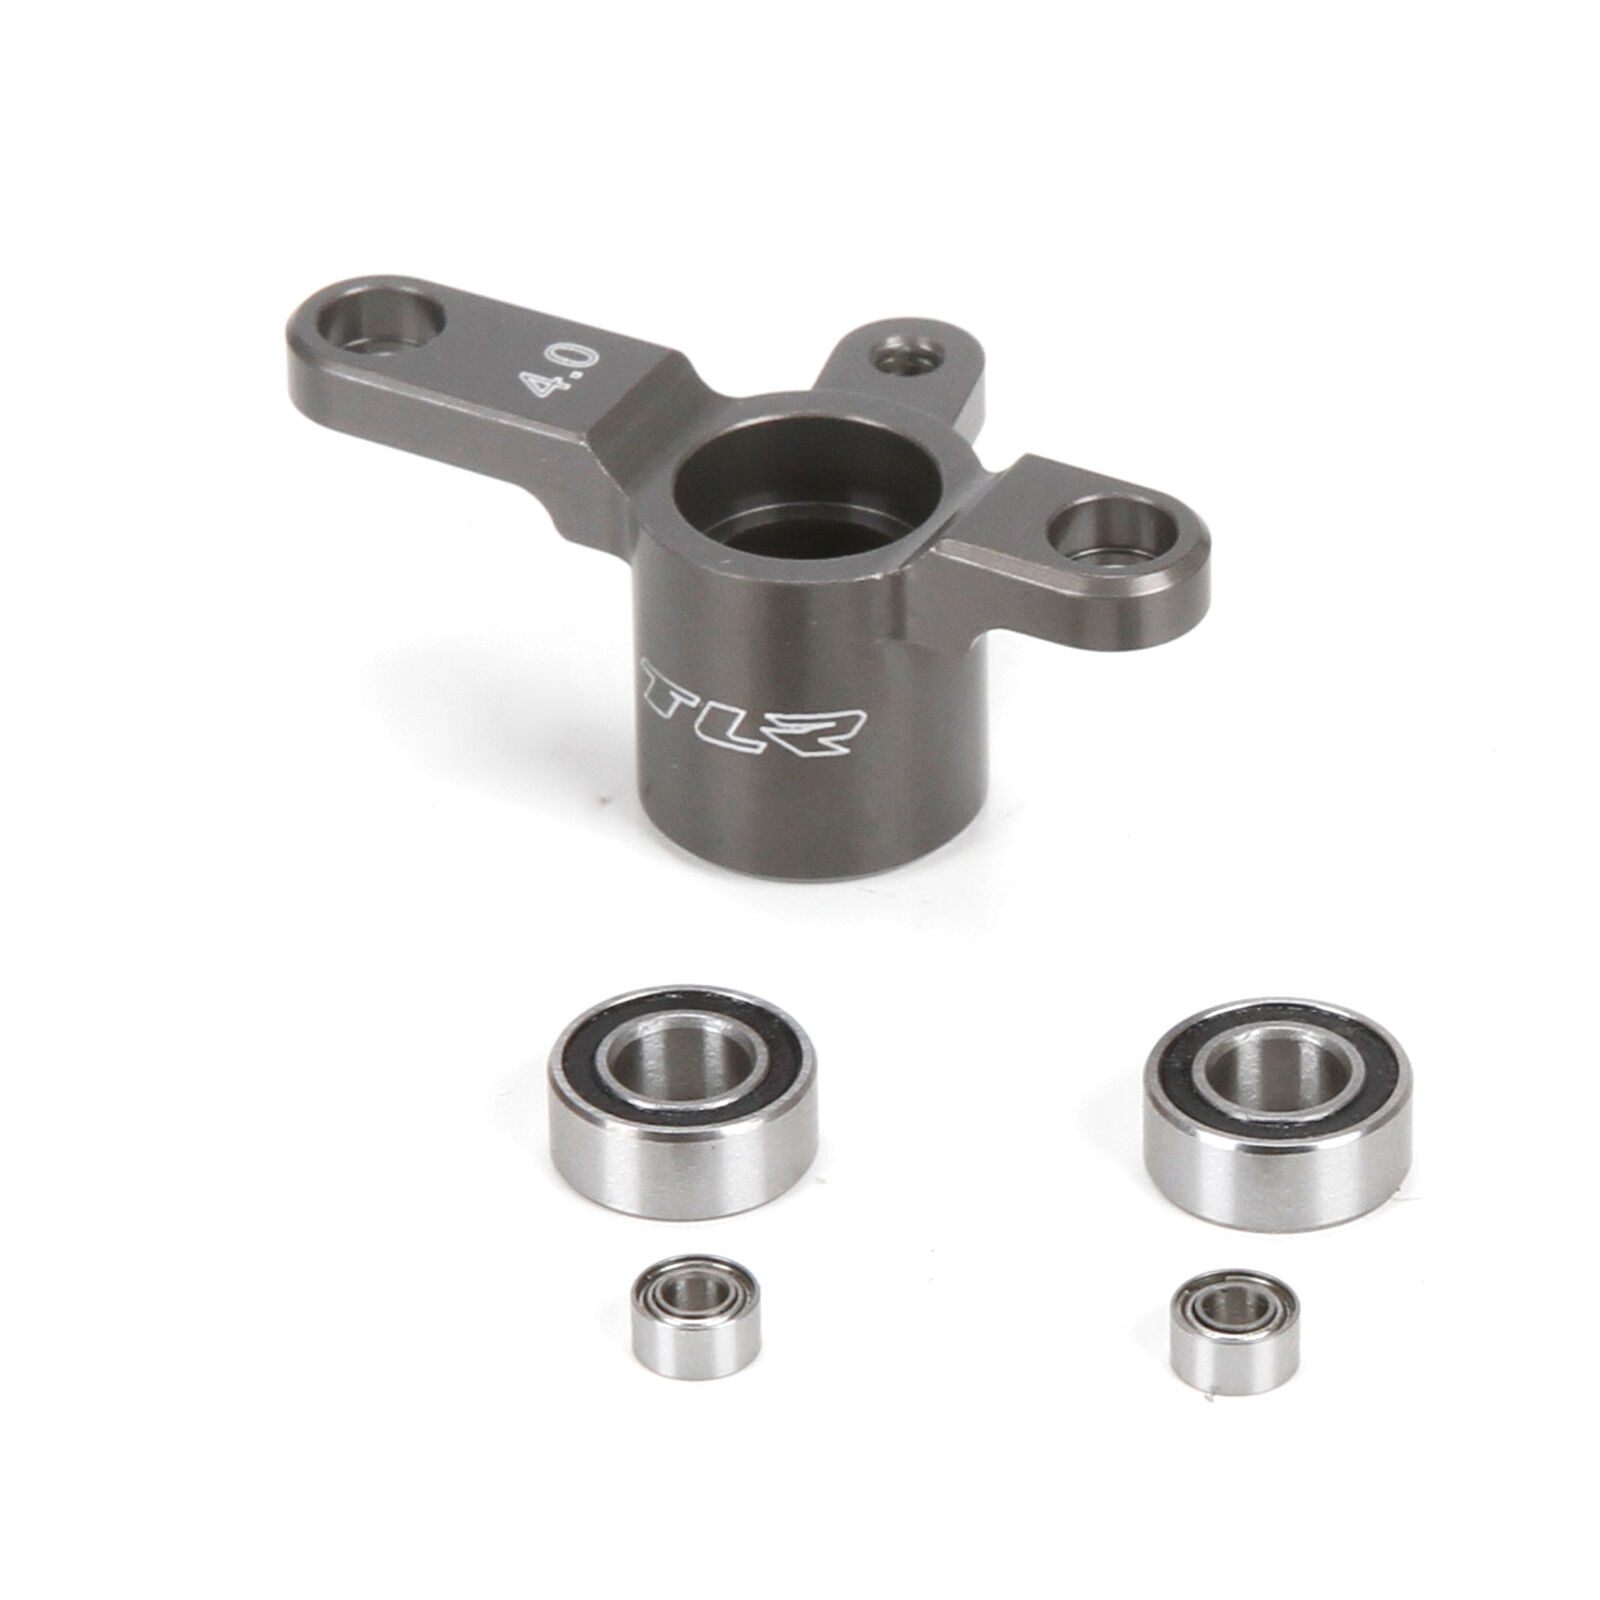 Aluminum Throttle Tri-Horn with Bearings: 8IGHT 4.0